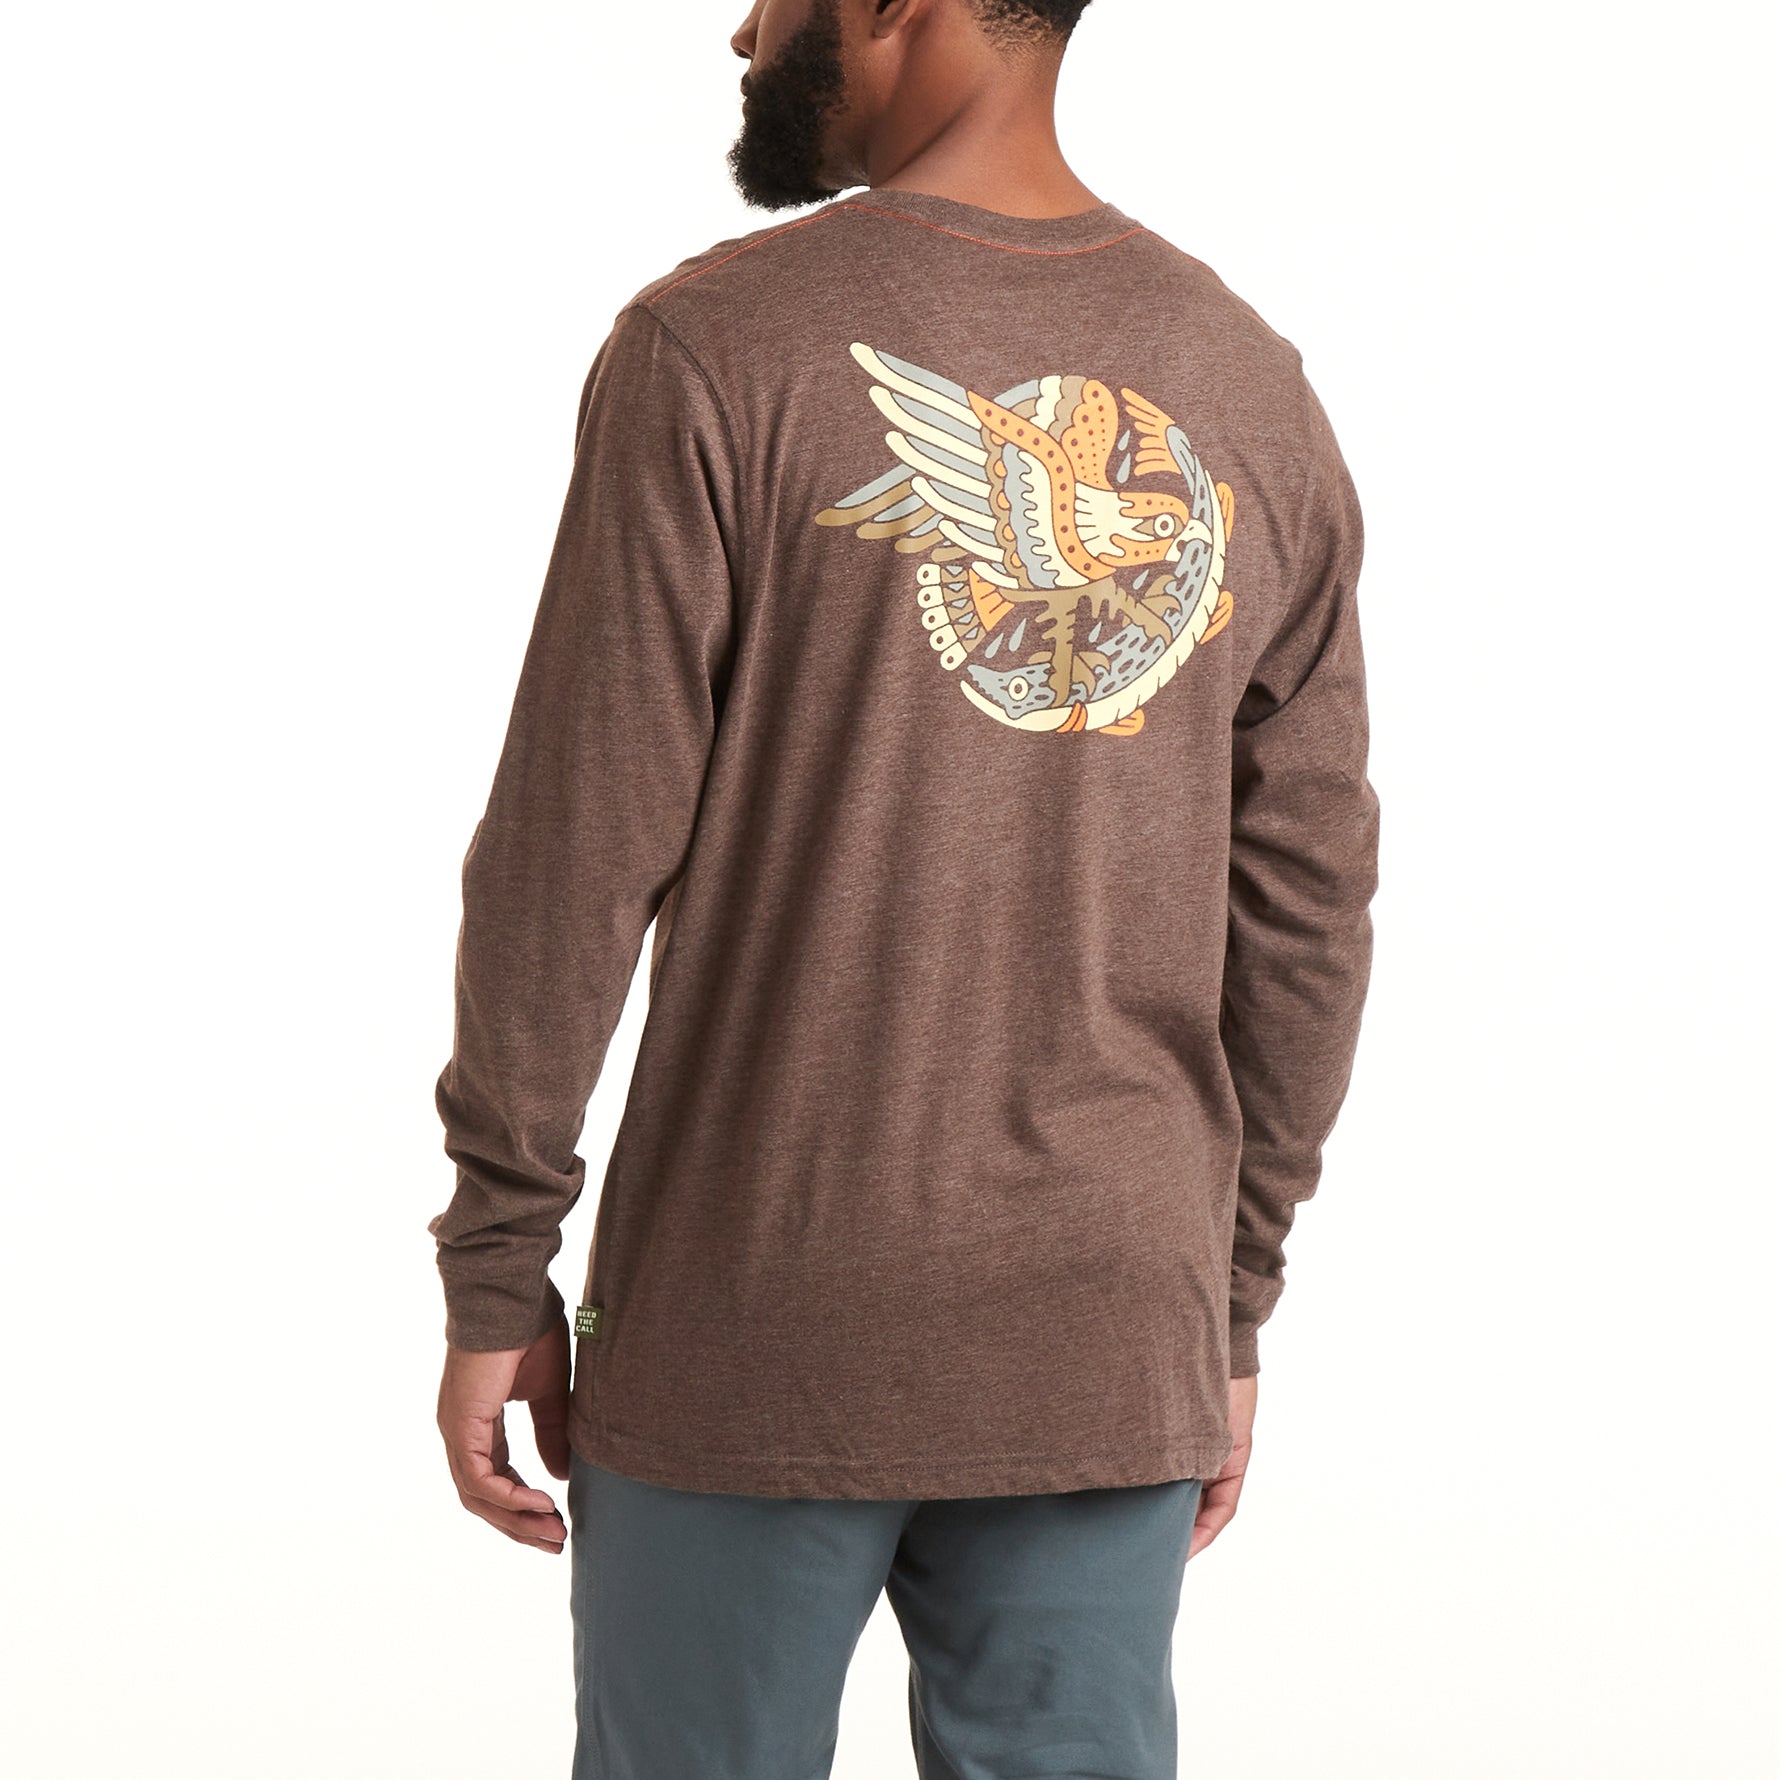 Osprey and Pike Select Longsleeve T-Shirt – HOWLER BROTHERS